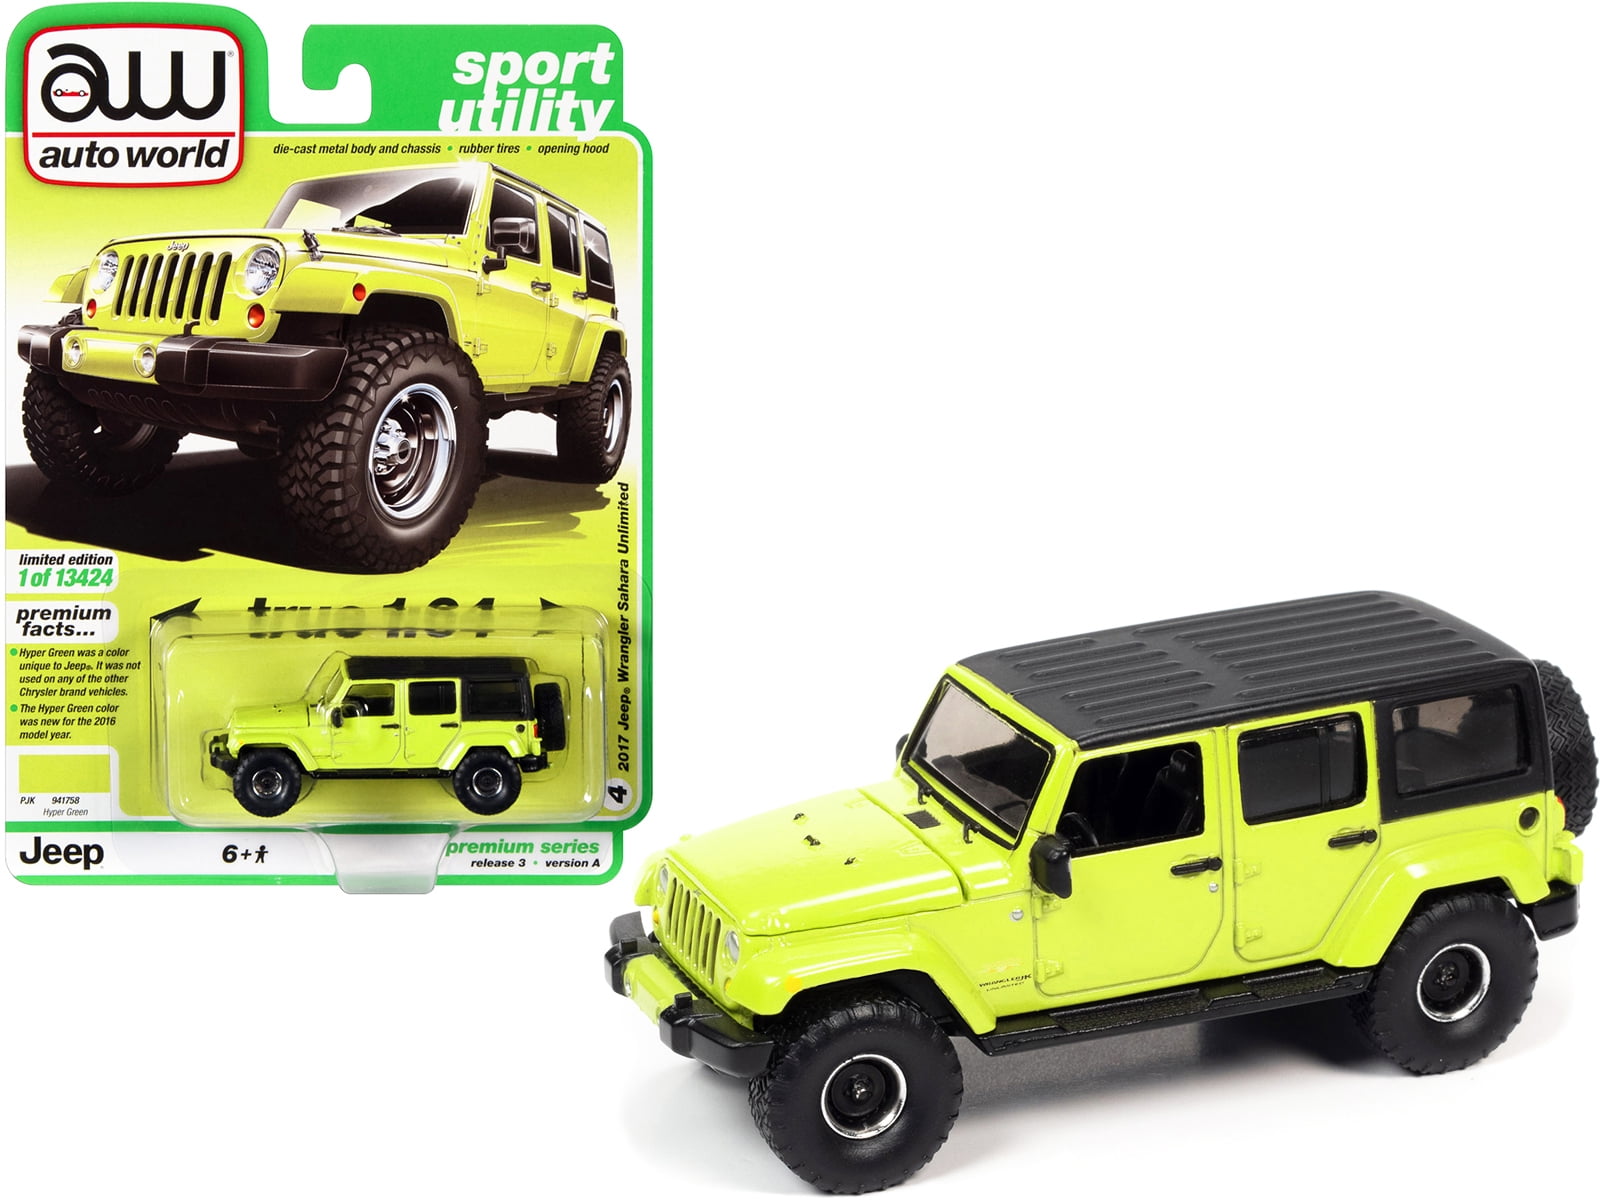 1:32 Jeep Wrangler Rubicon Off-road SUV Car Model Toy Vehicle Diecast Gift Green 